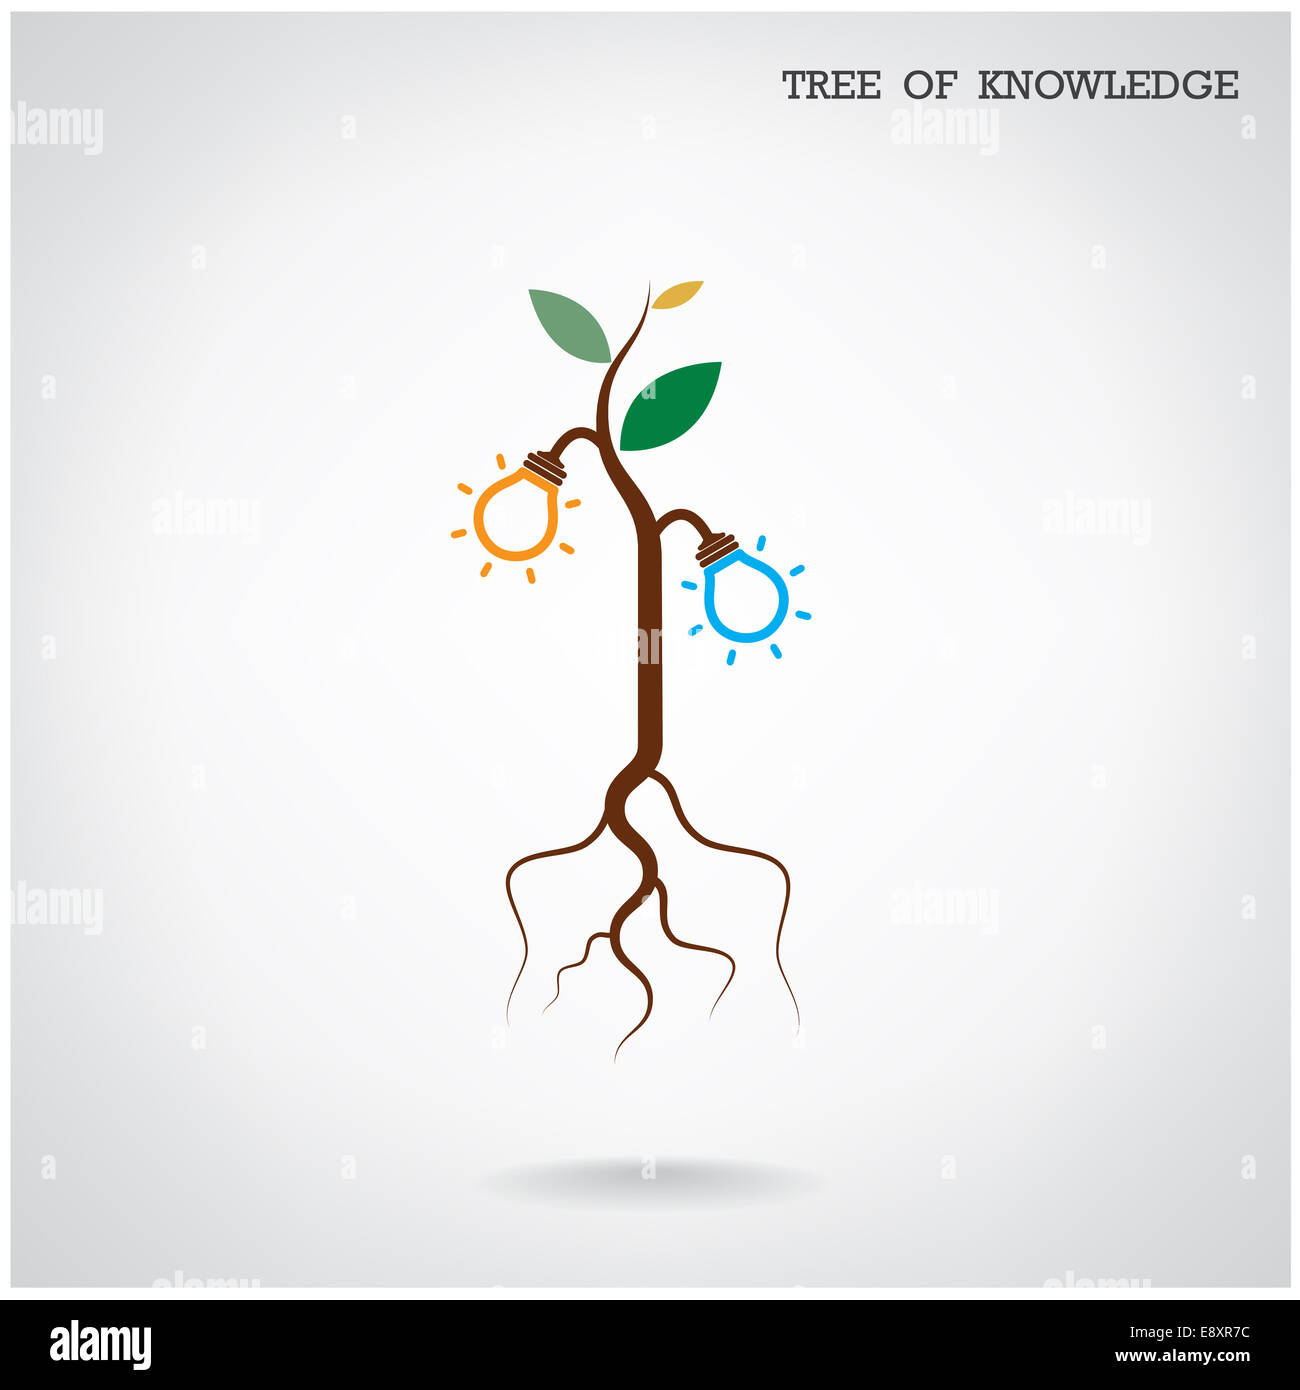 Tree of Knowledge concept. Education and business sign. Stock Photo